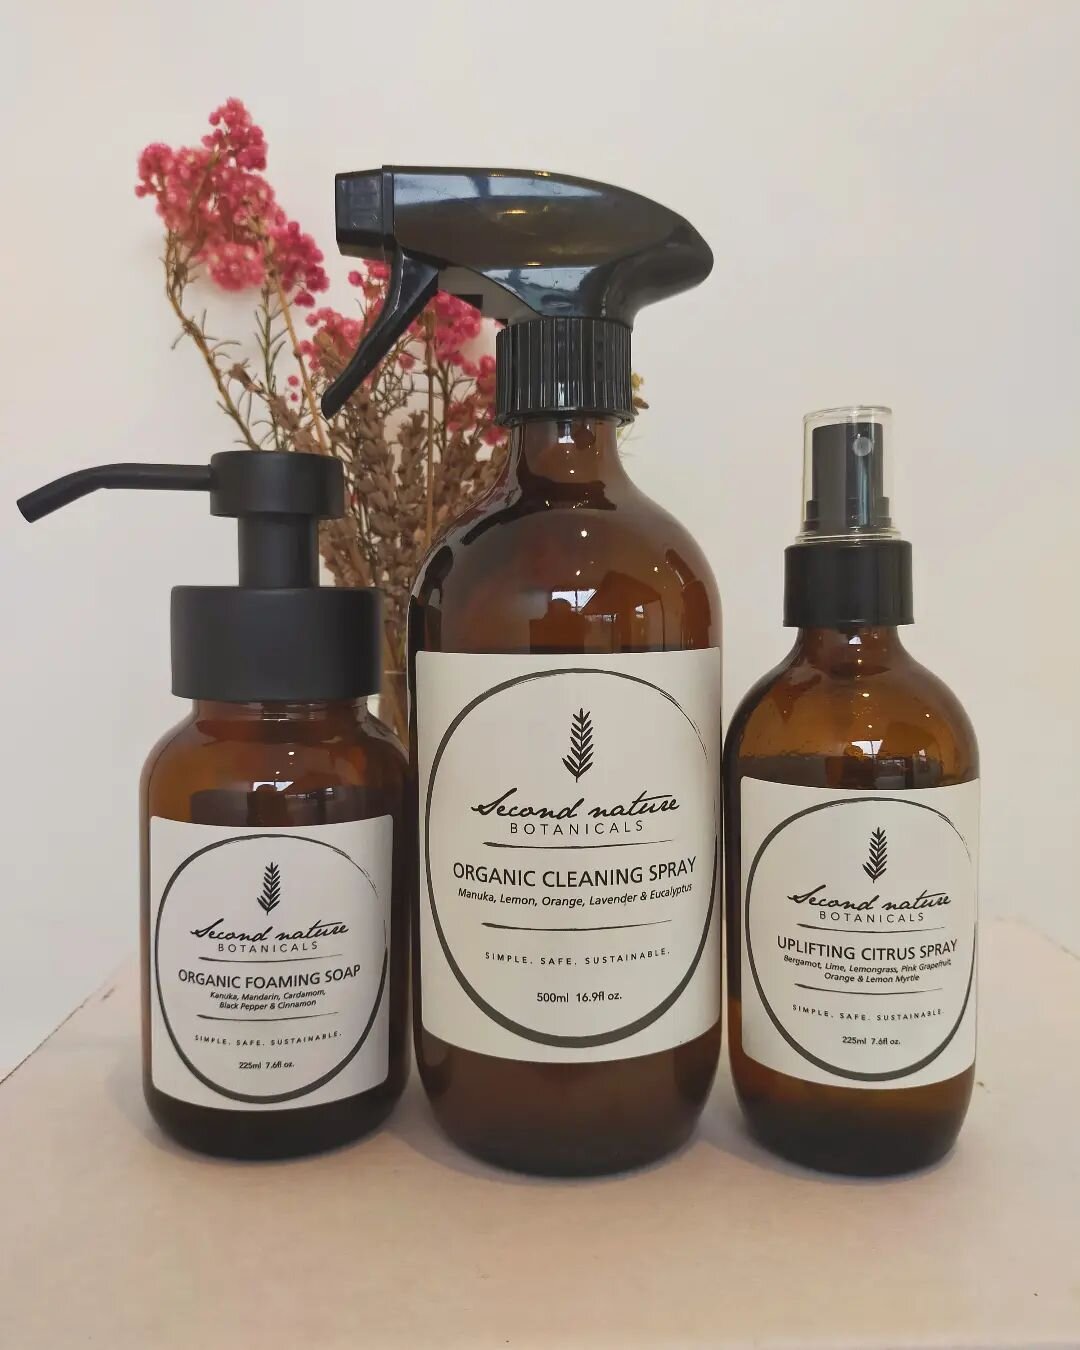 Perfect Christmas present🎁.

Organic Cleaning Spray, Organic Foaming Soap, Uplifting Citrus Spray. Perfection combo. No nasty chemicals all natural.

Simple + Safe + Sustainable.

#tauranga #naturalingredents #smallbusiness #greenliving #bayofplenty